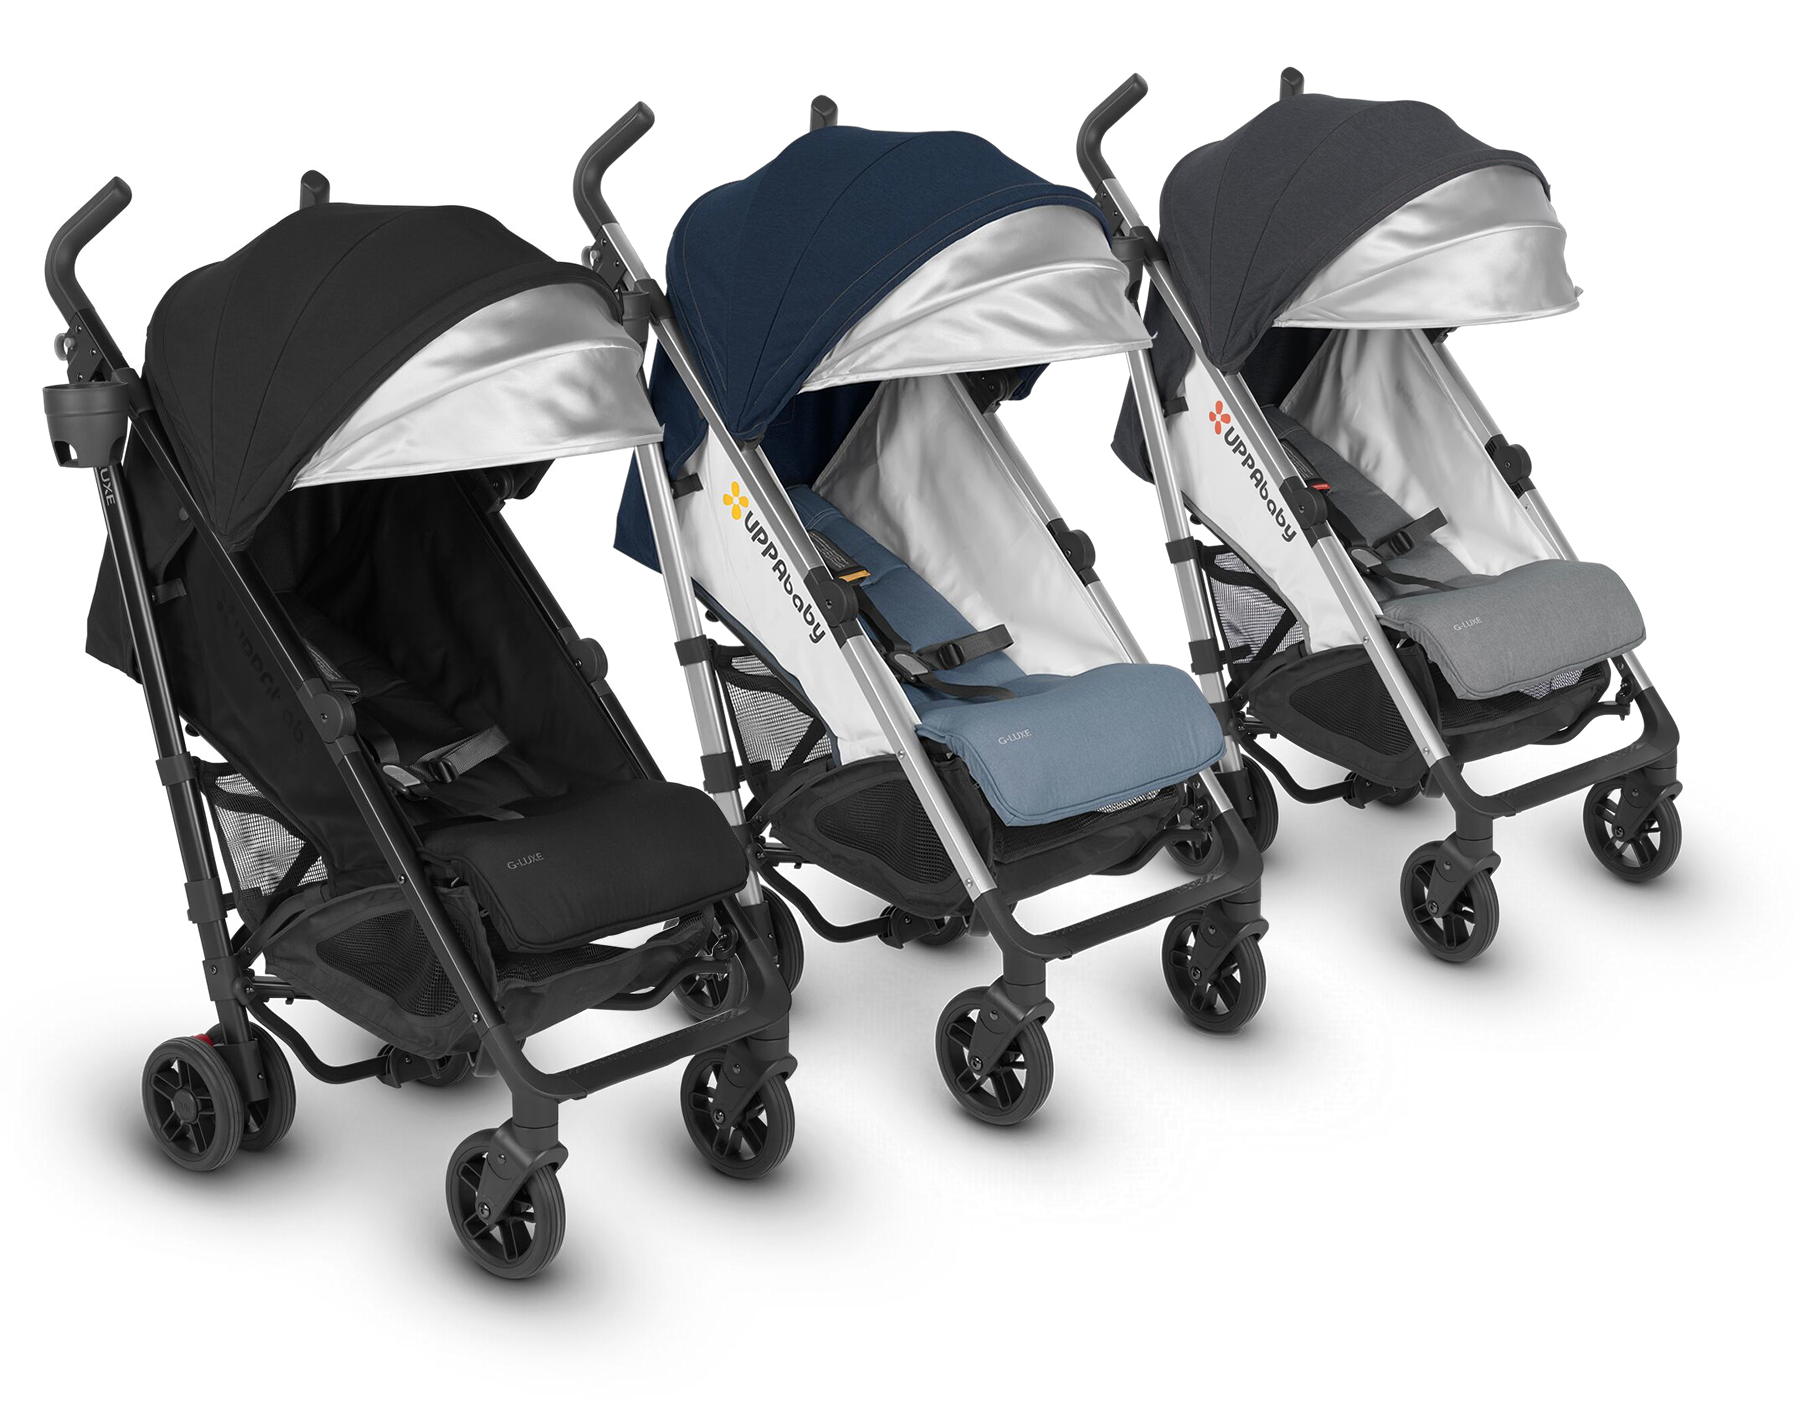 uppababy g luxe price